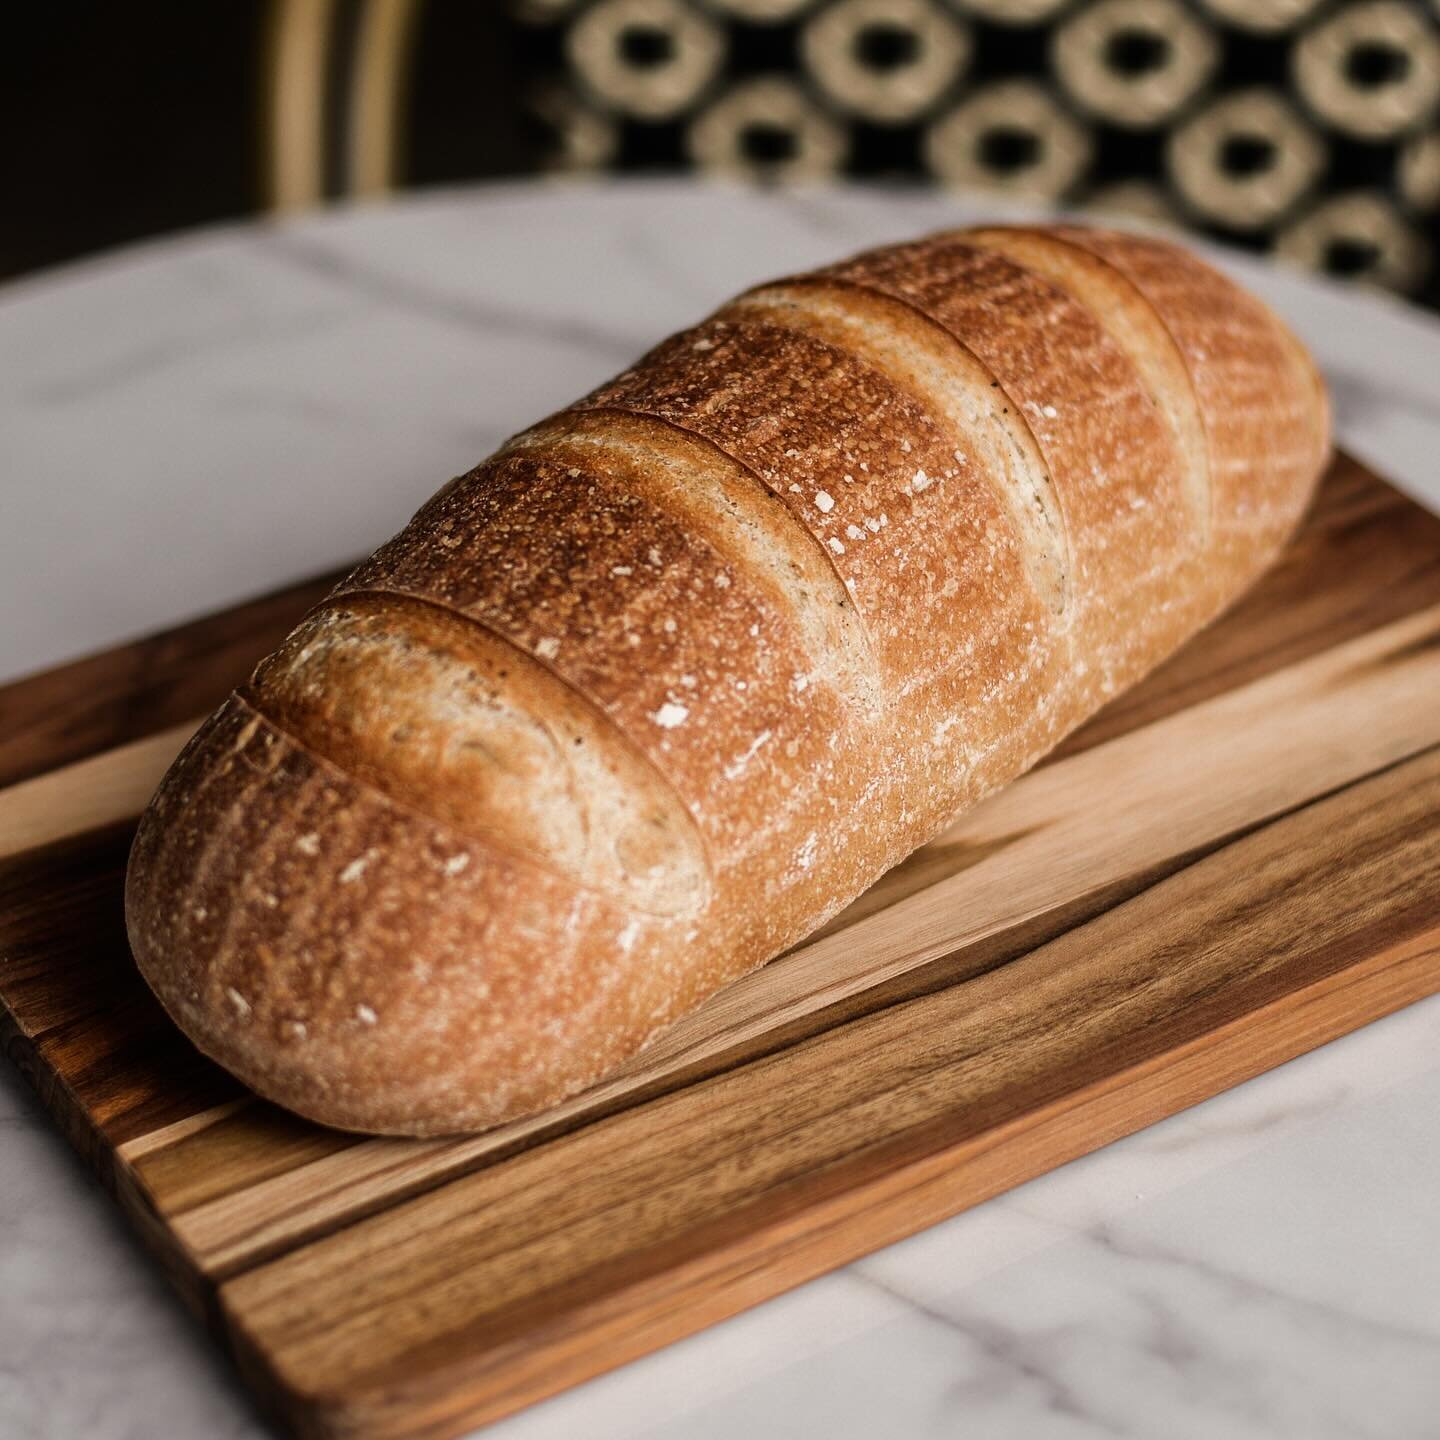 Our bread is available for purchase in the cafe, as well as the following local stores:
- Orange Street Food Farm
- Pattee Creek Market
- Burnt Fork Market
- The Good Food Store